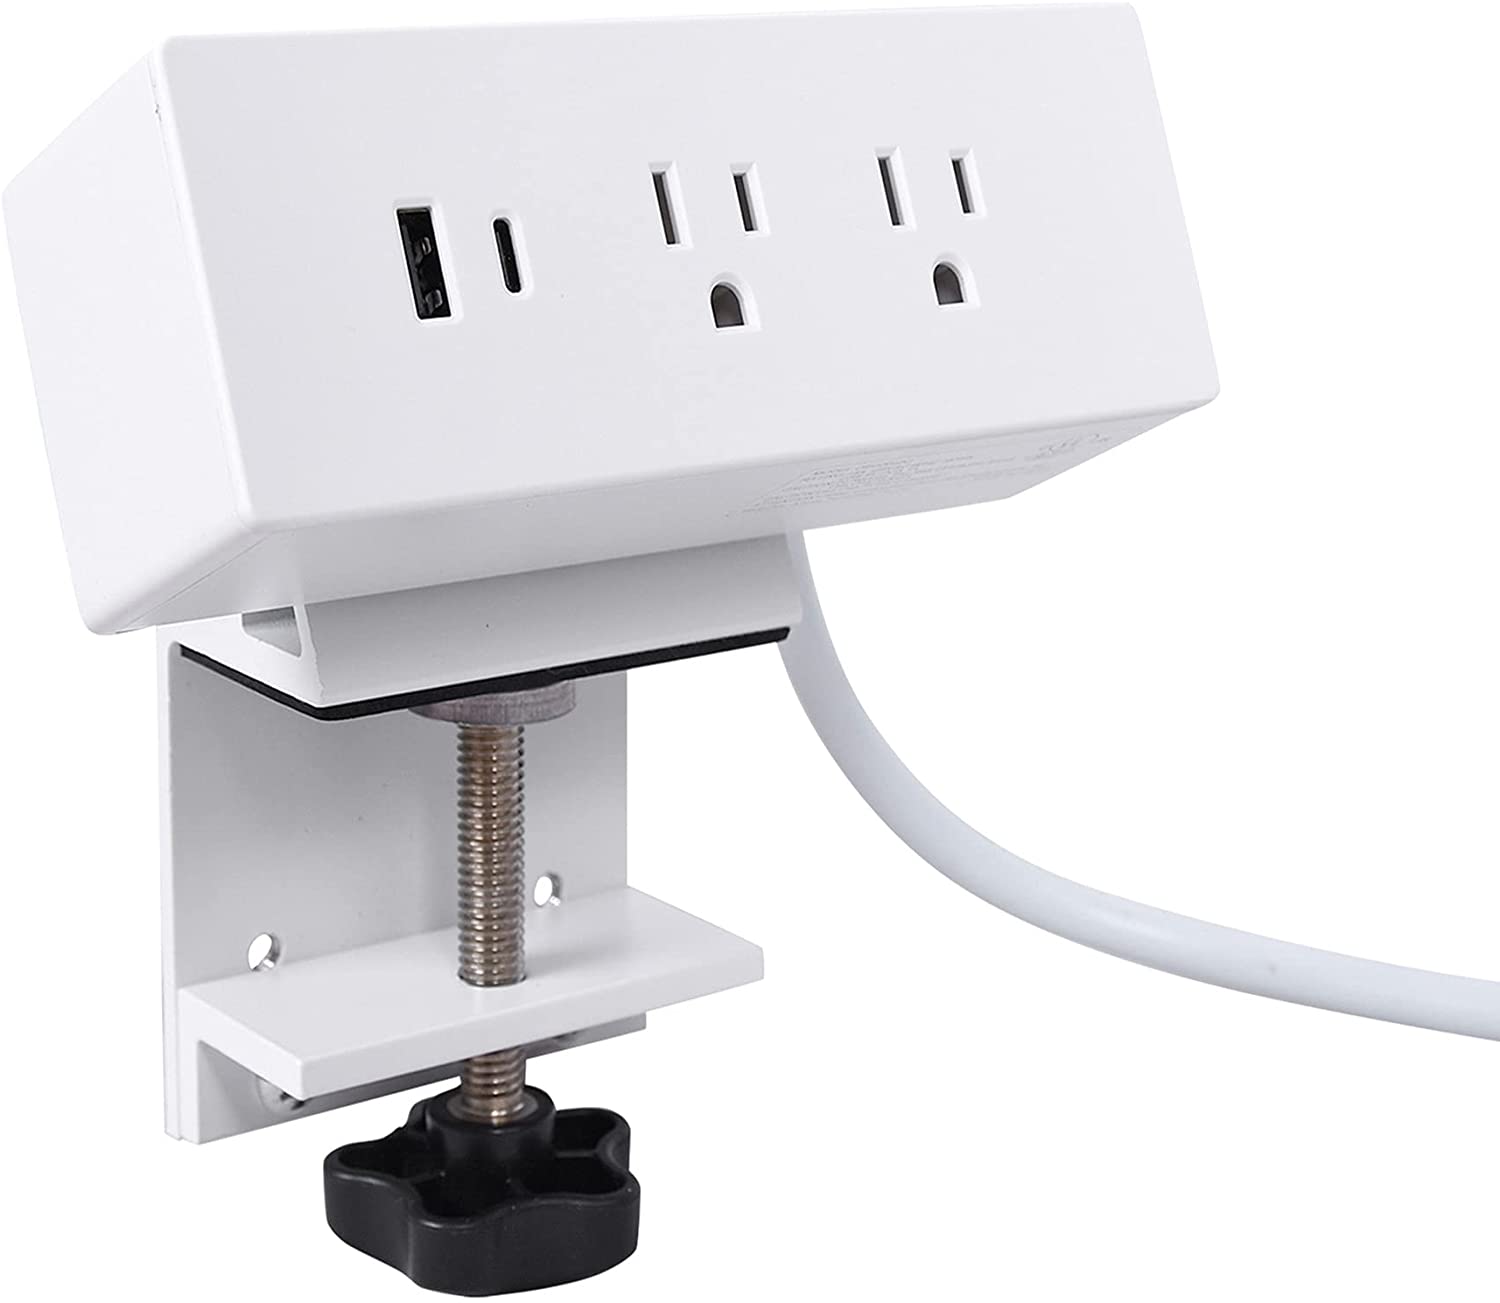 Desk Clamp Power Strip Desktop Edge Mount Outlets with Type-A and Type-C USB Charging Ports 2 AC Outlets, Removable Power Plugs with 6ft Power Cord for Home Office